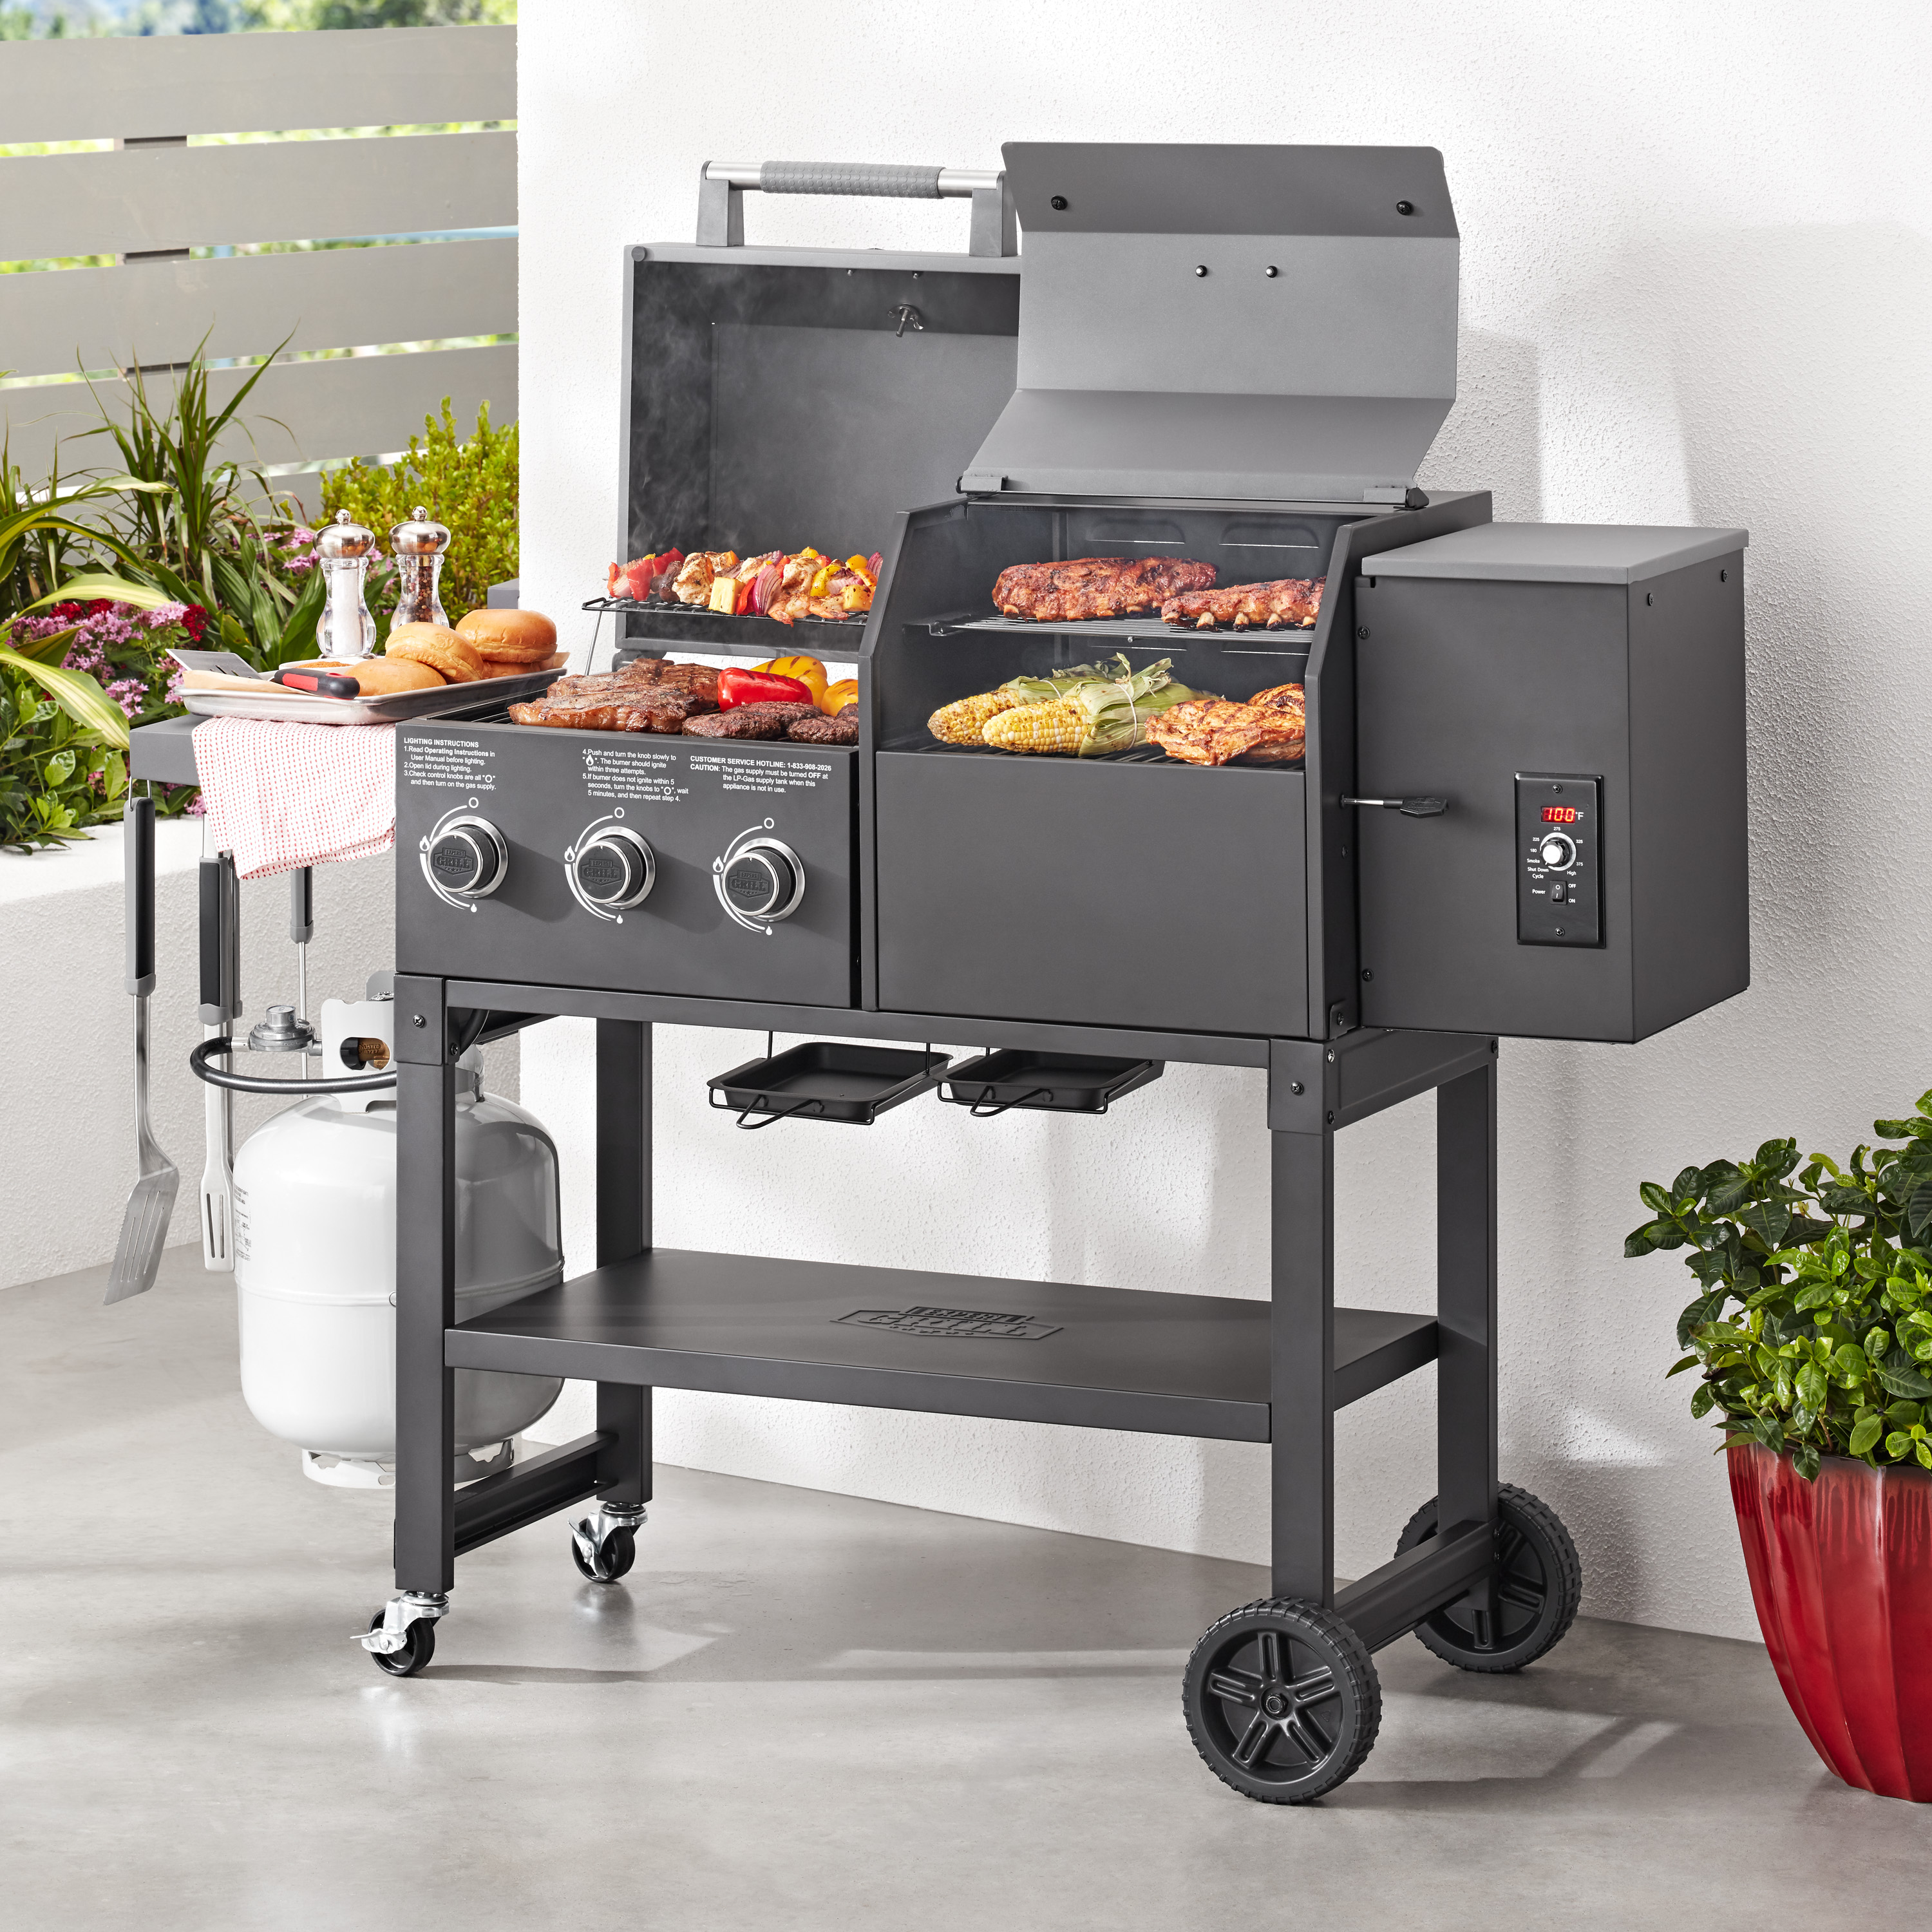 Expert Grill Gas Grill and Pellet Grill Combo - image 3 of 9